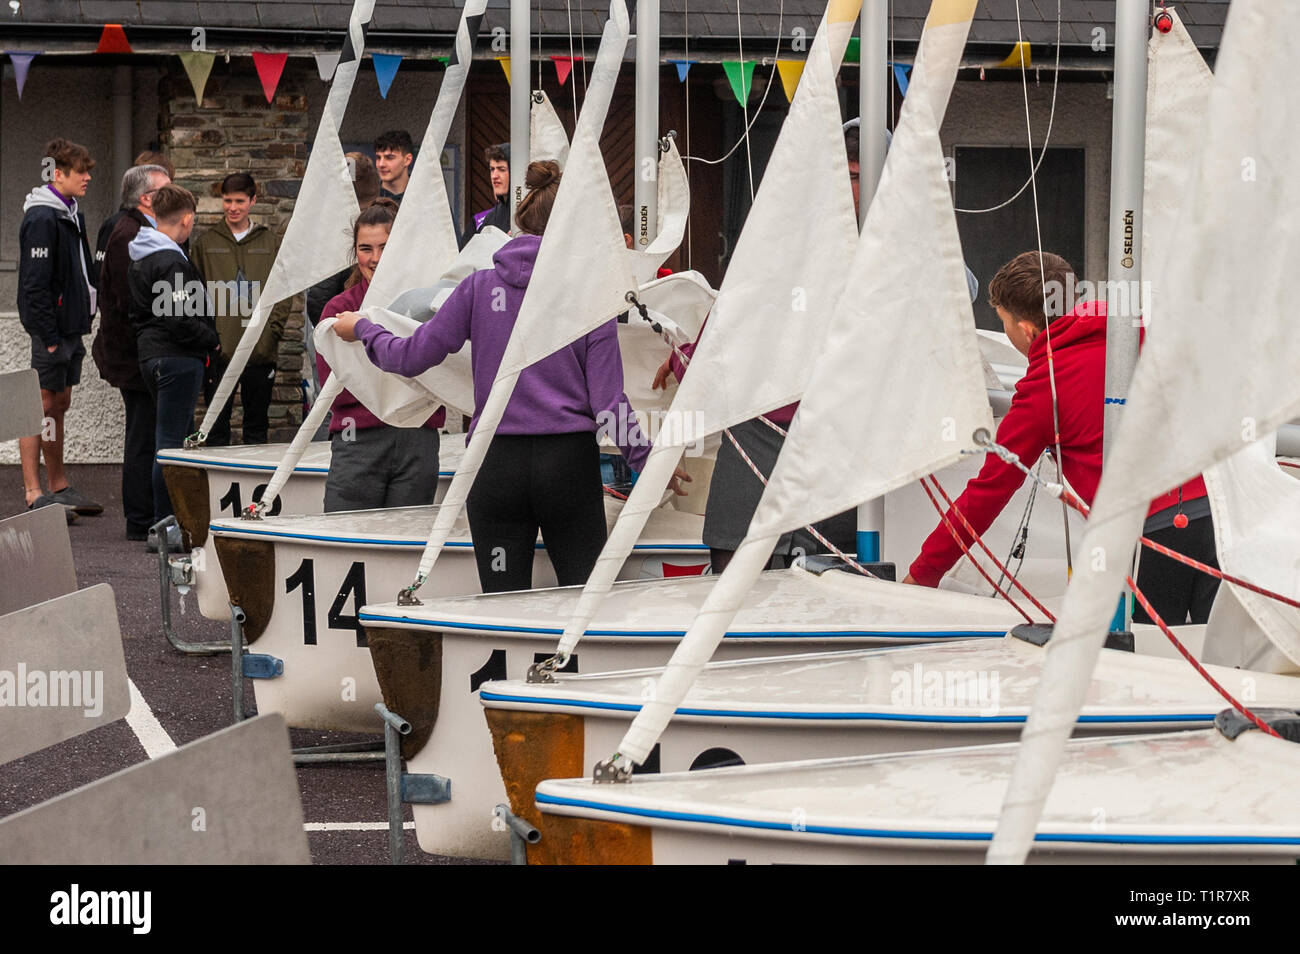 Schull, West Cork, Ireland. 28th Mar, 2019. Competitors and juddges prepare for a day's sailing on the second day of the Munster Schools Team Racing Championships, which is being held at the Fastnet Marine and Outdoor Education Centre in Schull today. The competition comprises of 13 teams of 6 sailors with the winners going on to compete in the National Championships. Credit: AG News/Alamy Live News Stock Photo